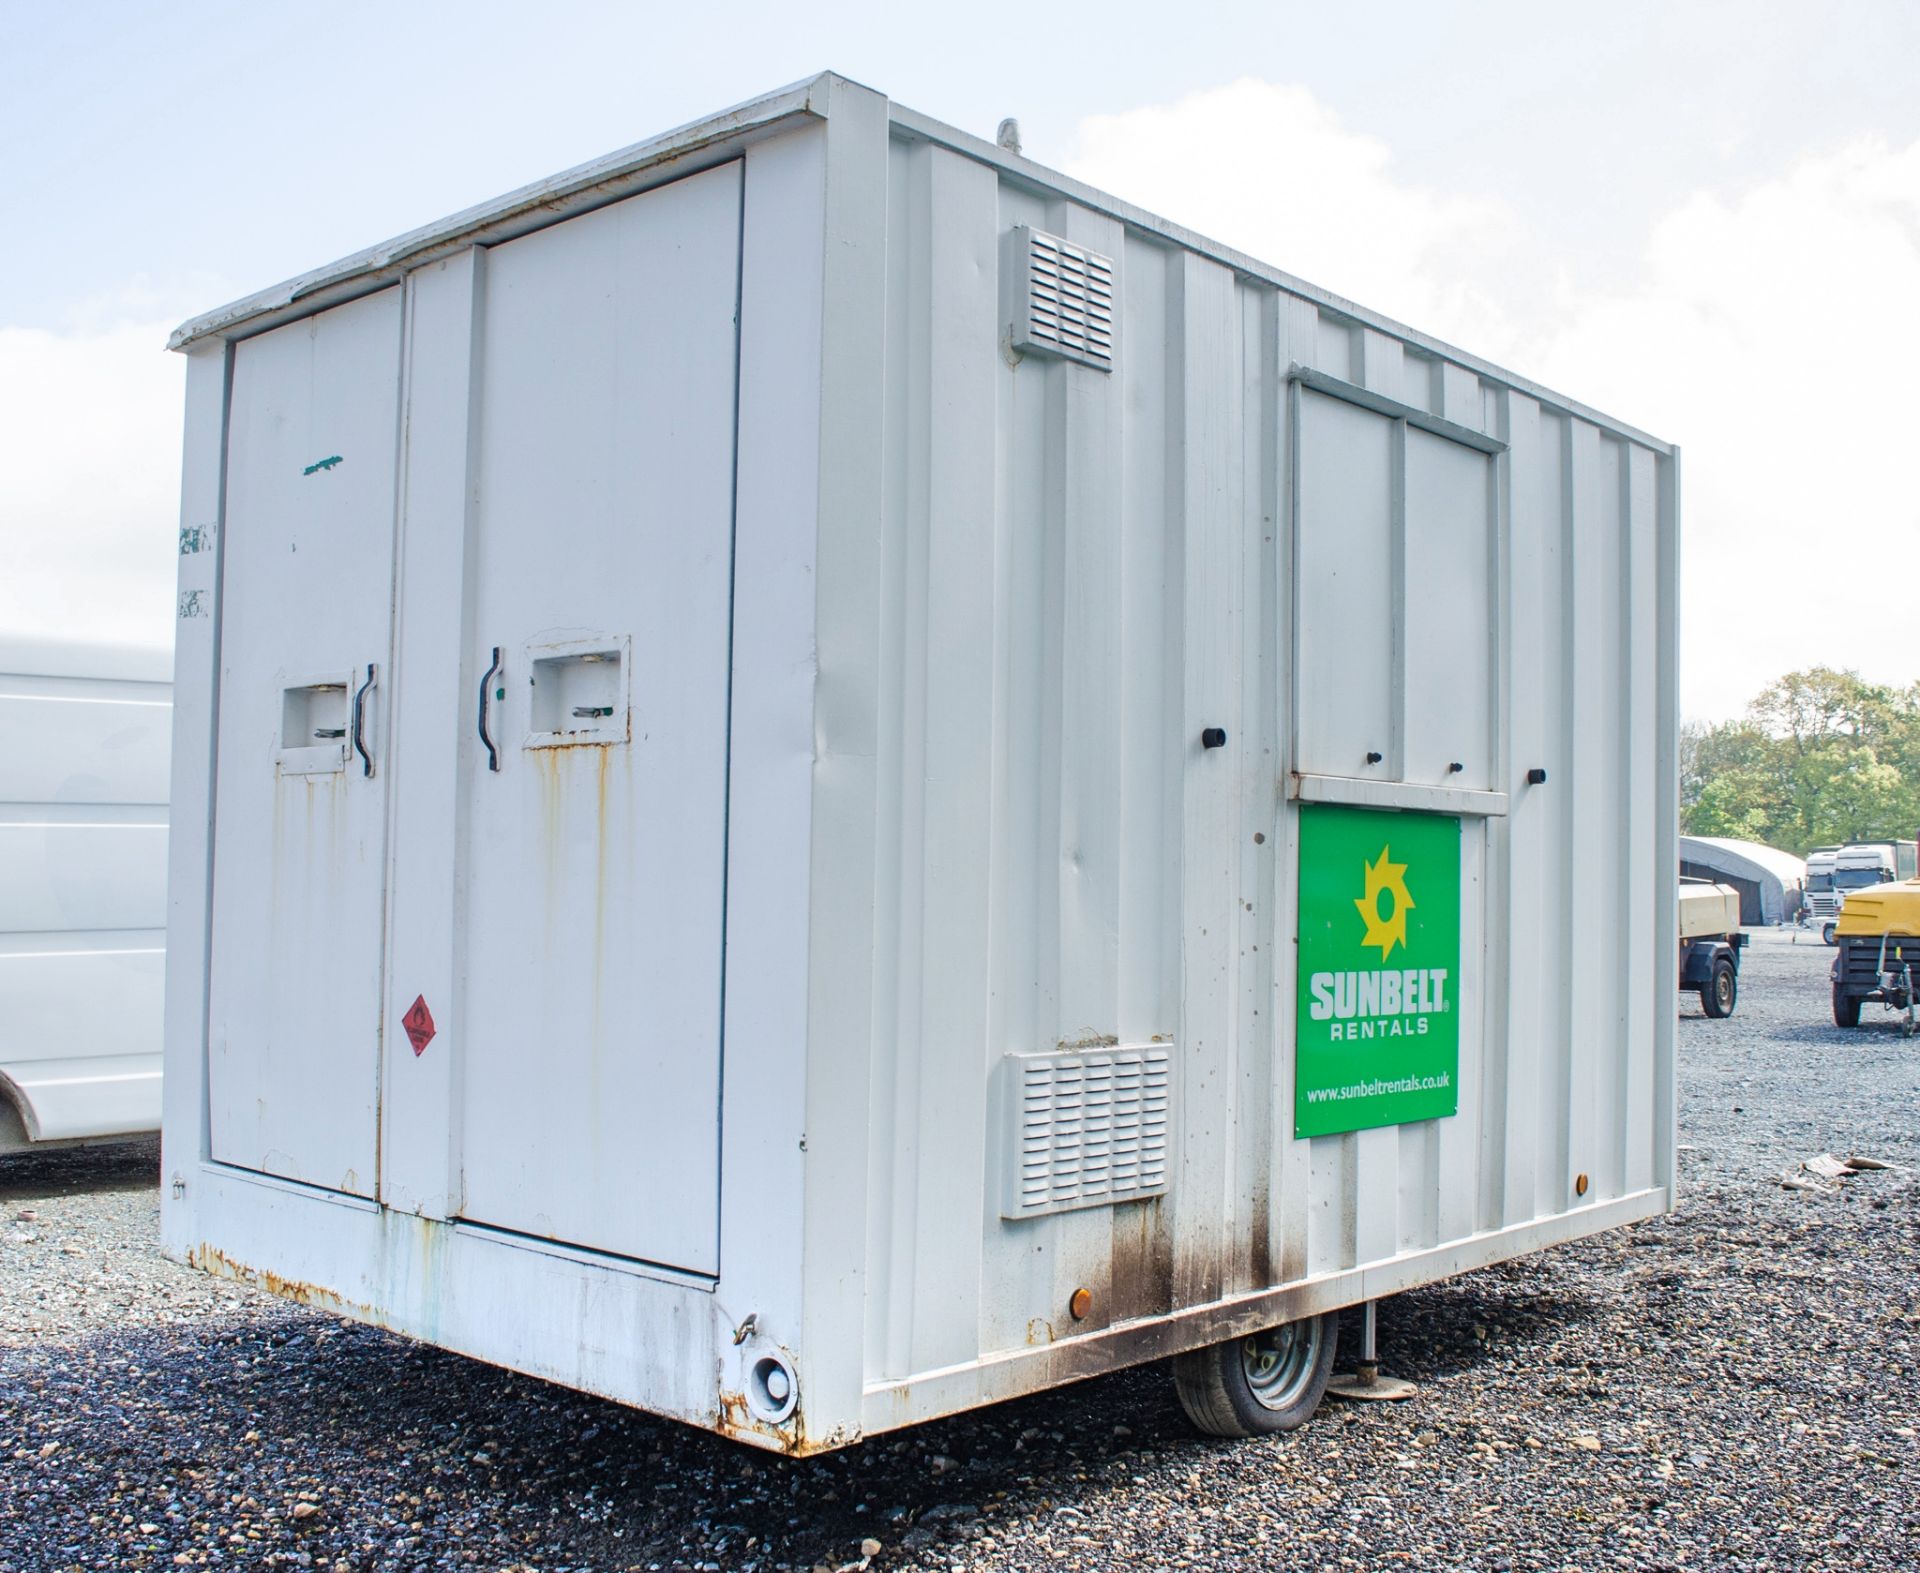 Groundhog 12 ft x 8 ft mobile welfare unit Comprising of: canteen area, toilet & generator room - Image 5 of 12